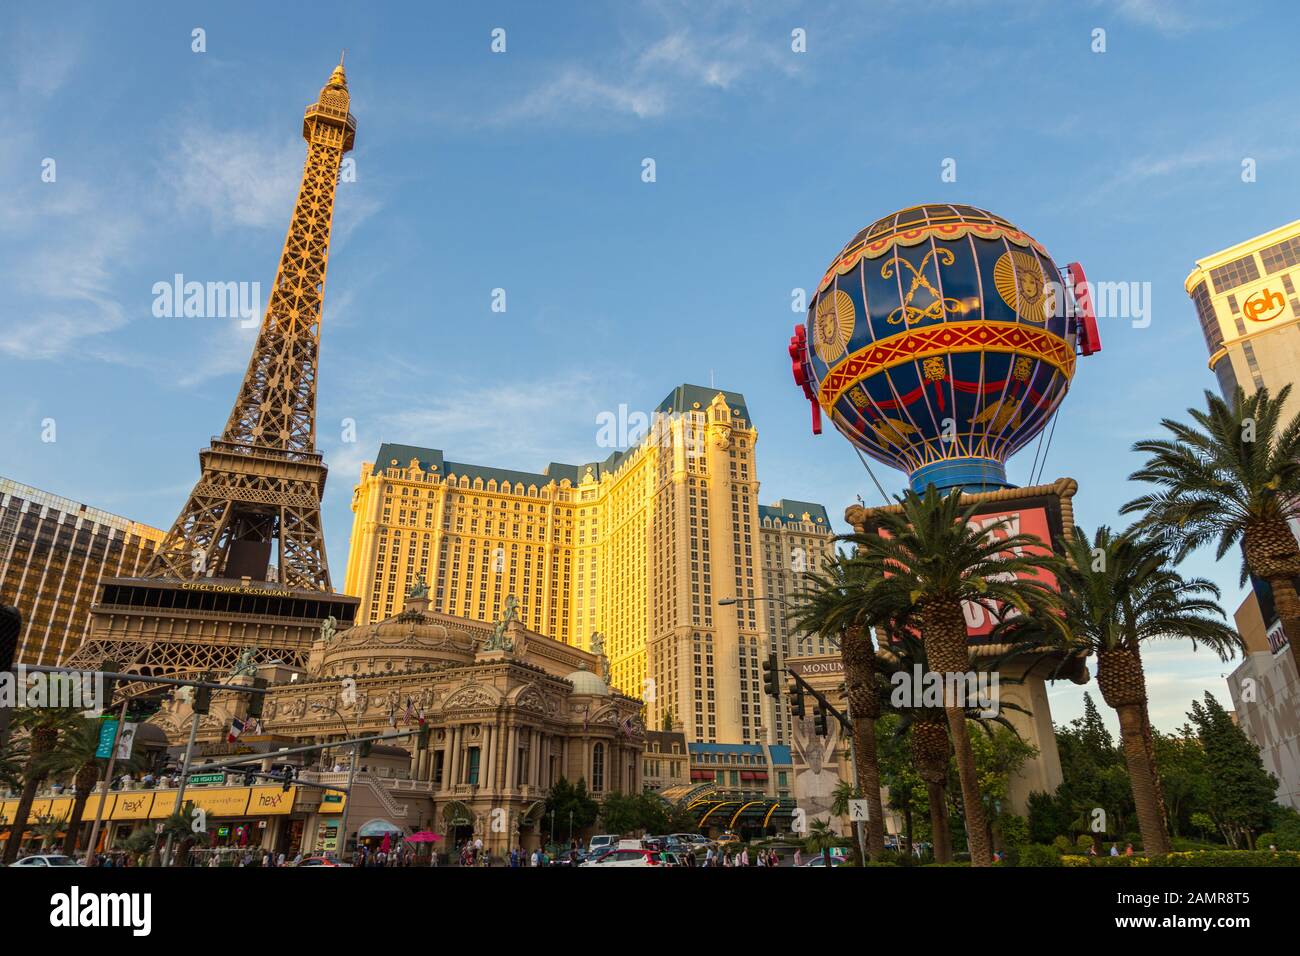 Las Vegas, Nevada, USA- 01 June 2015: A view of an elegant hotel at Las Vegas Boulevard, a miniature of the Eiffel Tower and a colorful balloon. Stock Photo